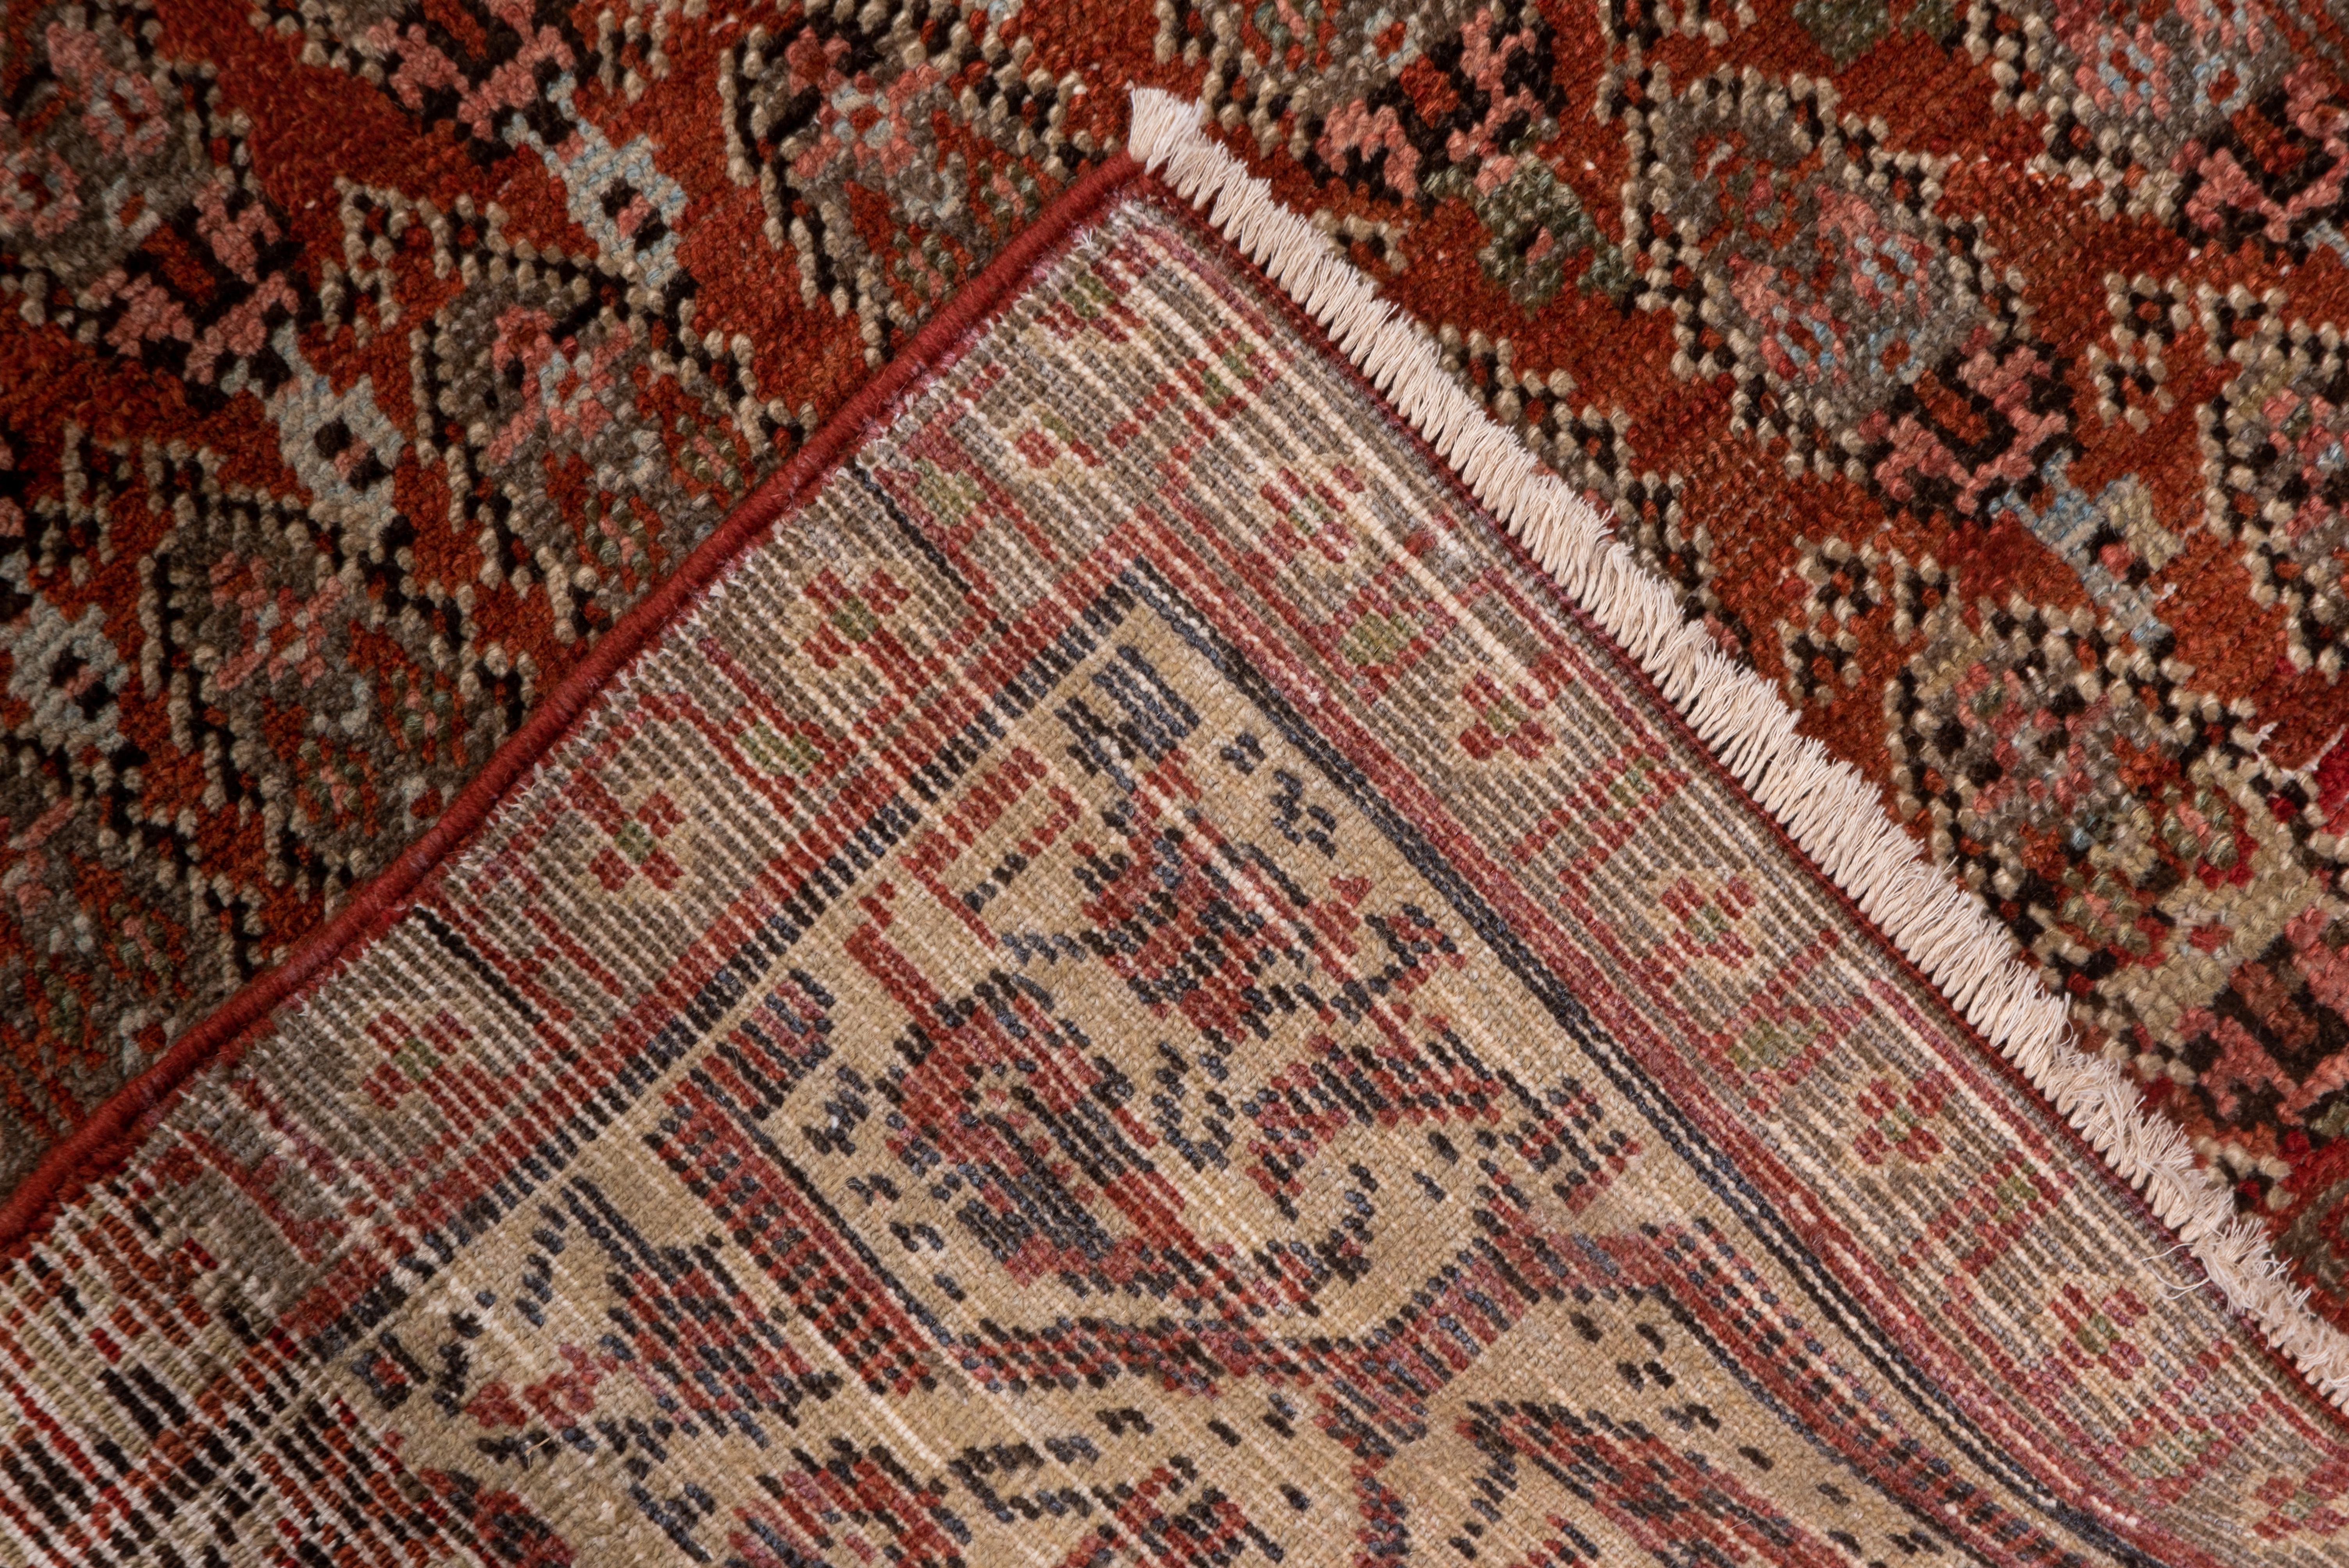 Urban-style runner with a red field expressing a half-drop, offset, row reversing, floriated boteh pattern. Dynamic taupe border with a faceted meander and suspended botehs. Medium weave, cotton foundation. Good condition. Iconic rendition. A